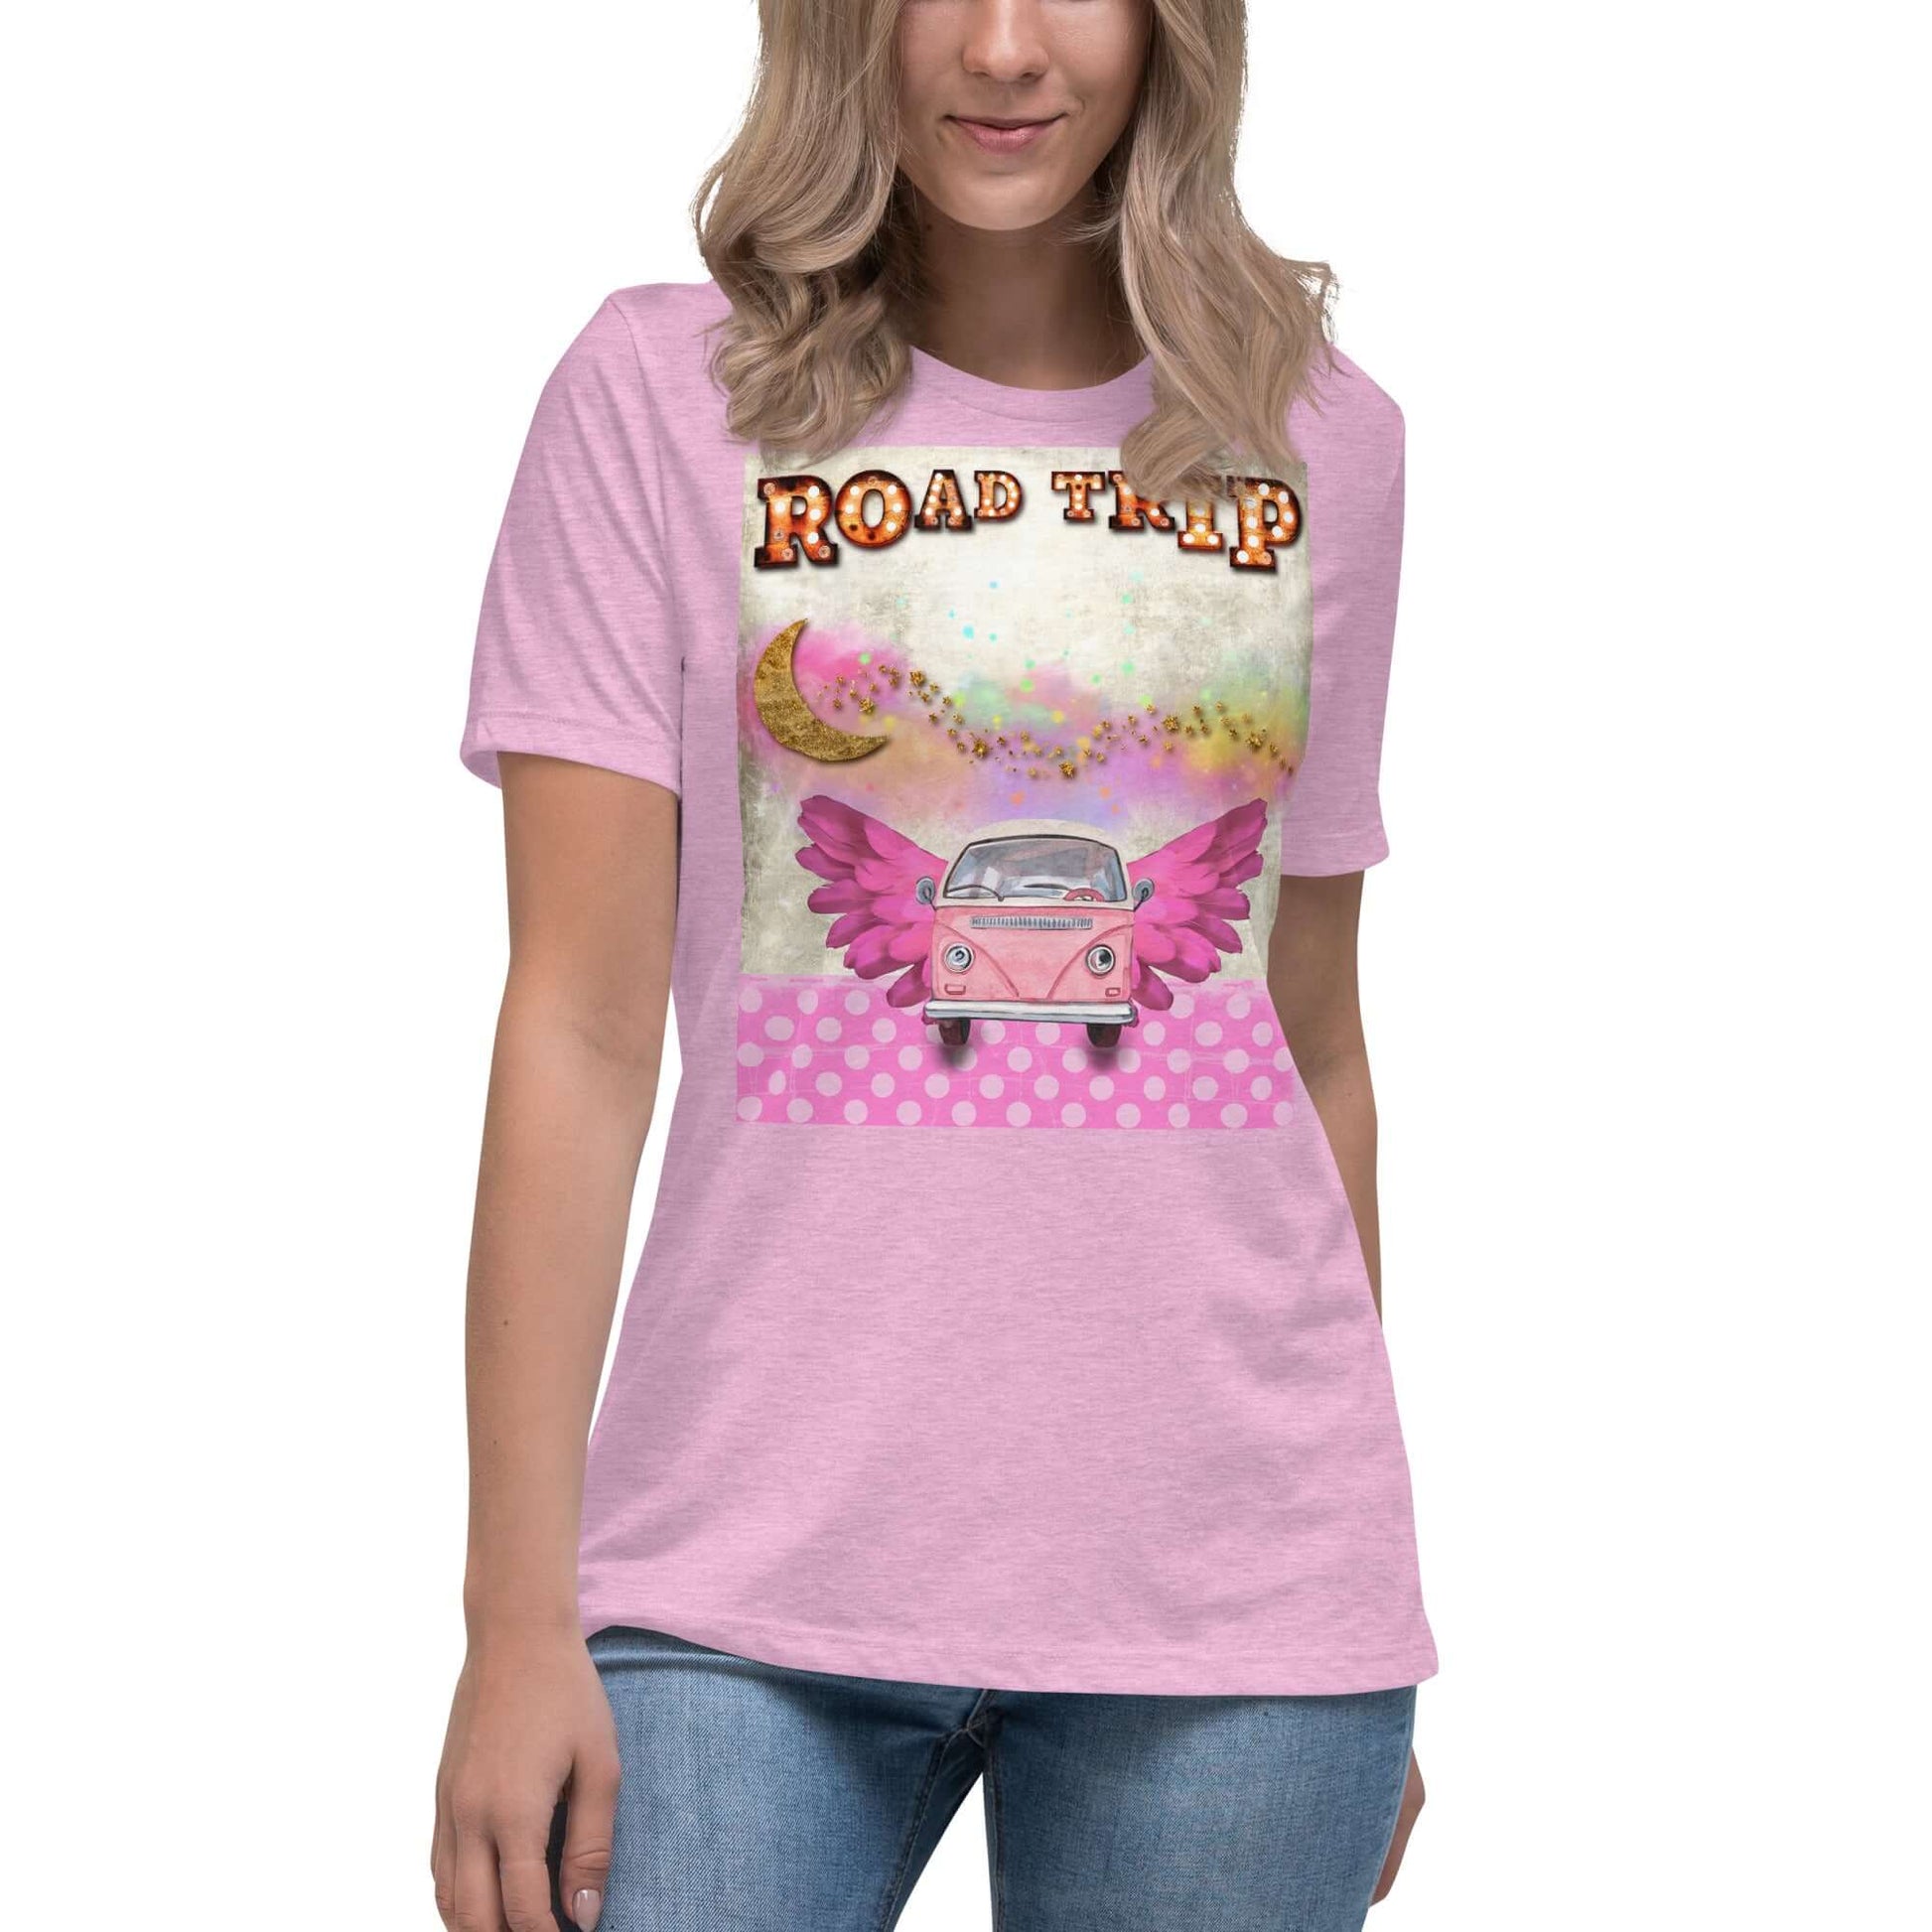 Pink Camper Van in Rainbow Clouds with Moon and Stars “Road Trip” Women’s Short Sleeve Tee in Heather Prism Lilac